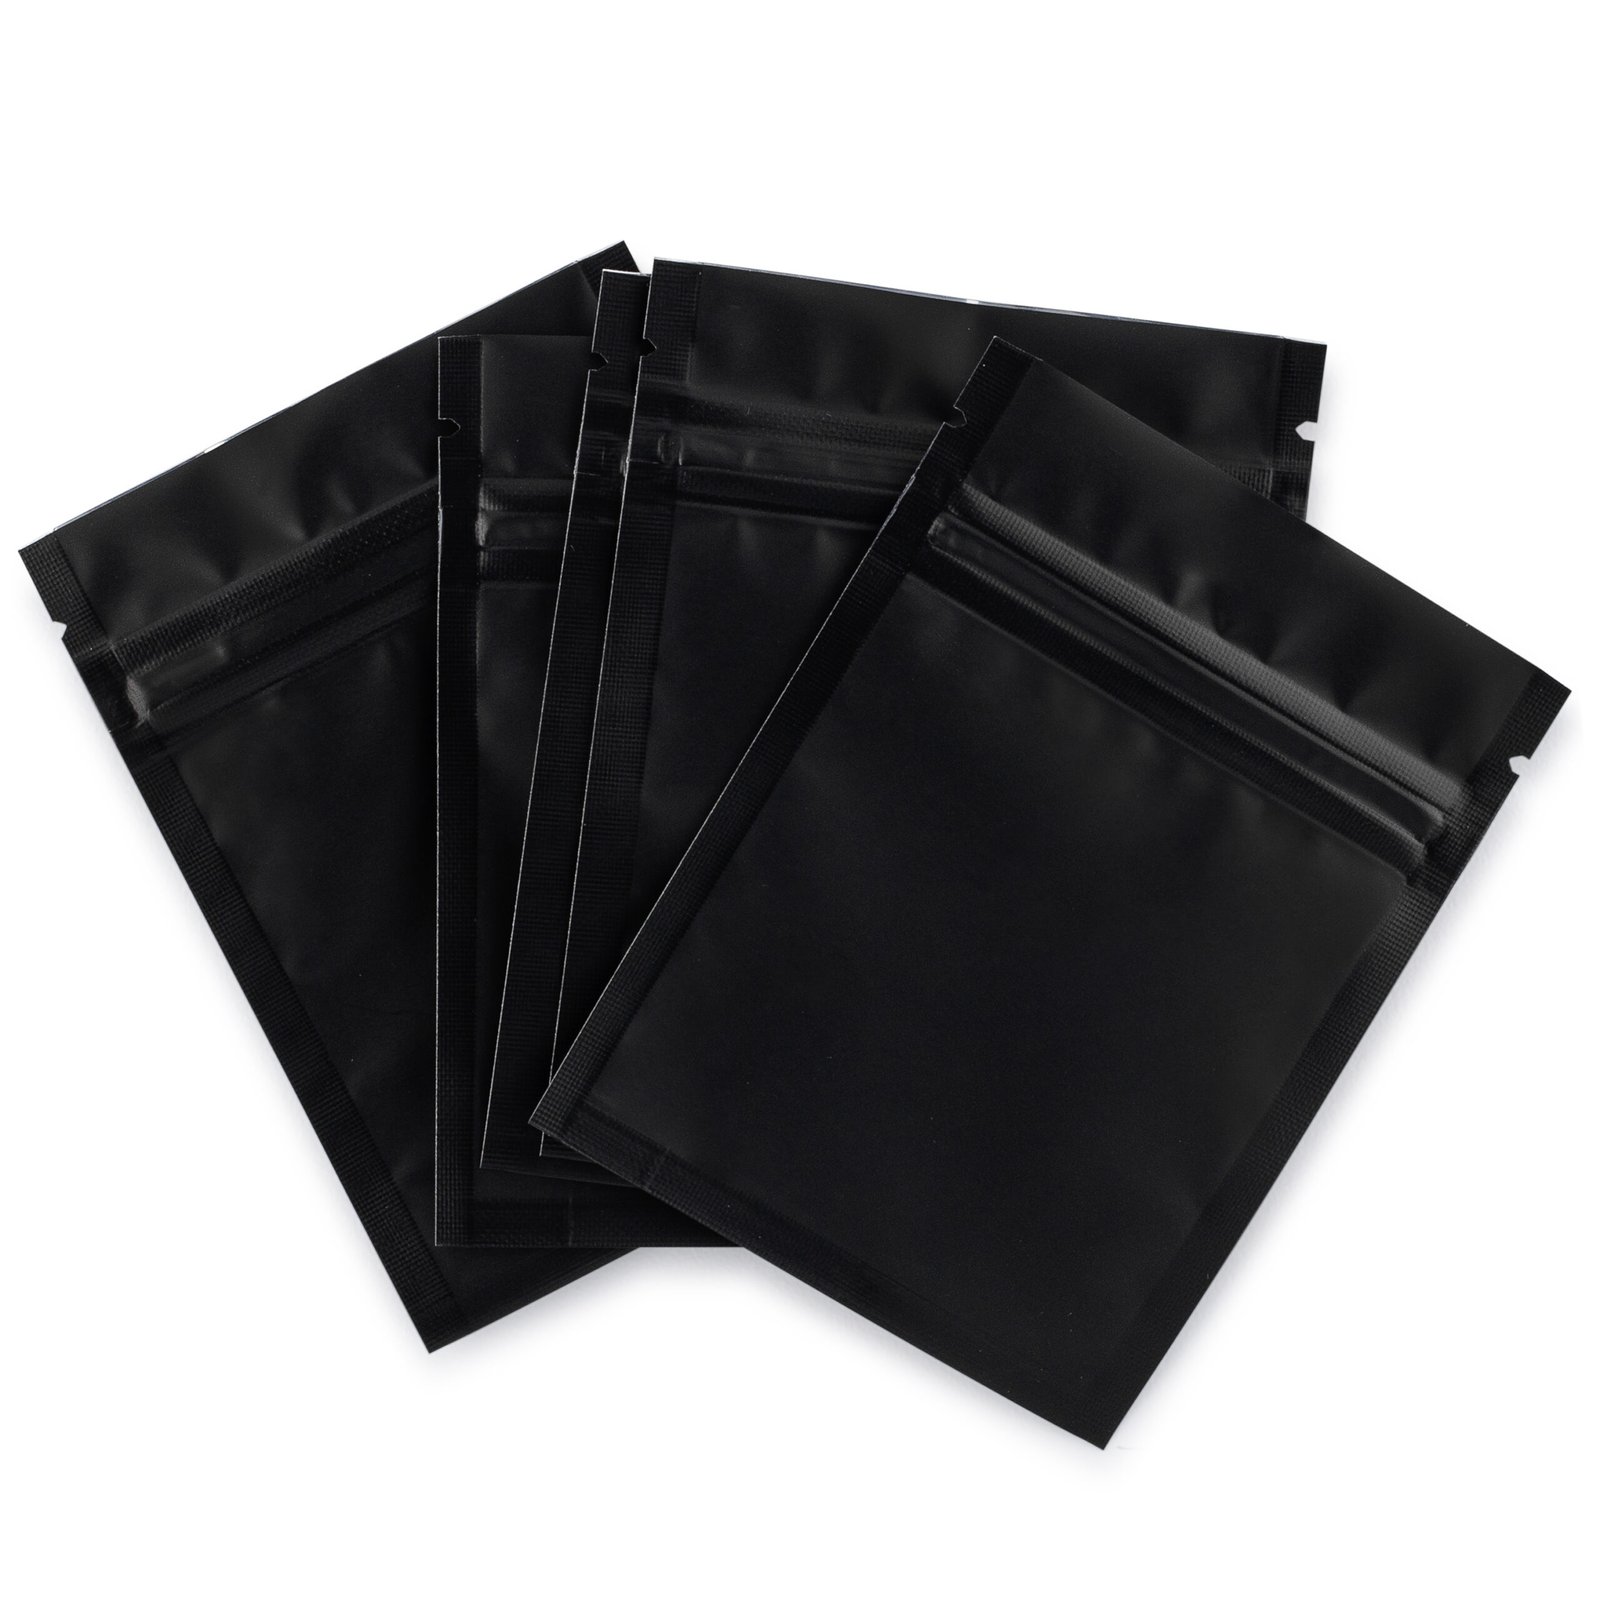 100 Pack Mylar Bags - 3.3 x 5.1 Inch Resealable Smell Proof Bags